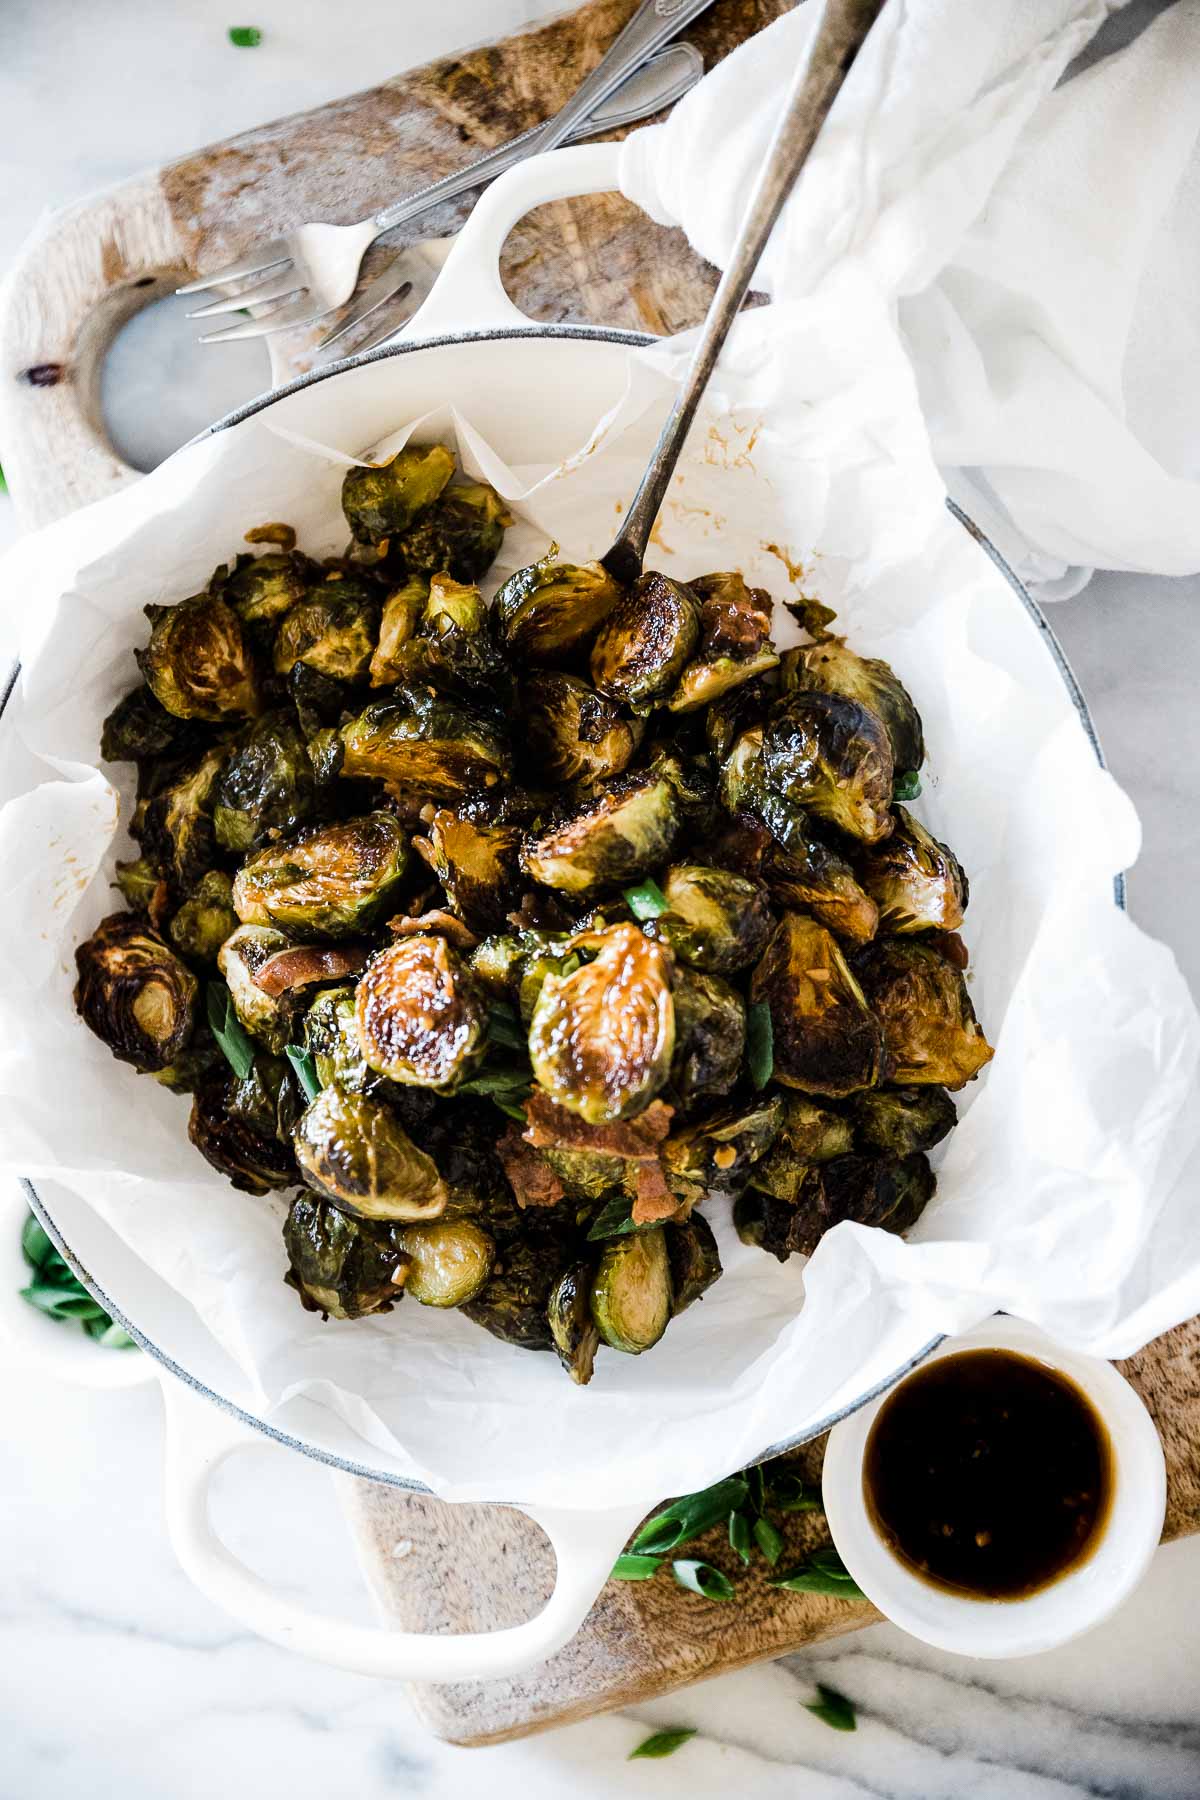 teriyaki roasted Brussel sprouts recipe in a white braiser. There is a bowl of teriyaki to the side.